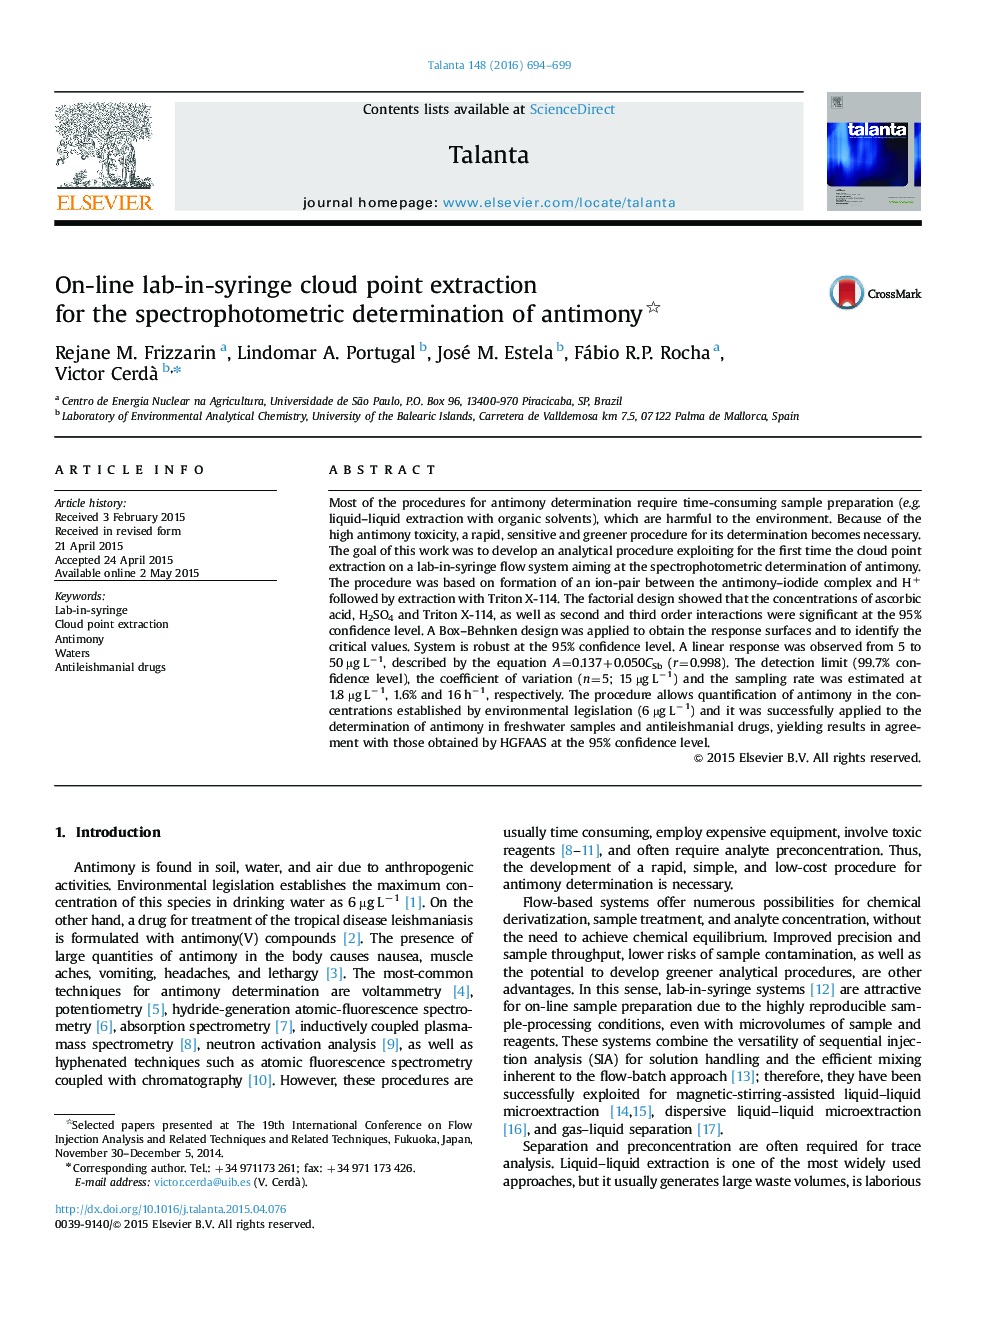 On-line lab-in-syringe cloud point extraction for the spectrophotometric determination of antimony 